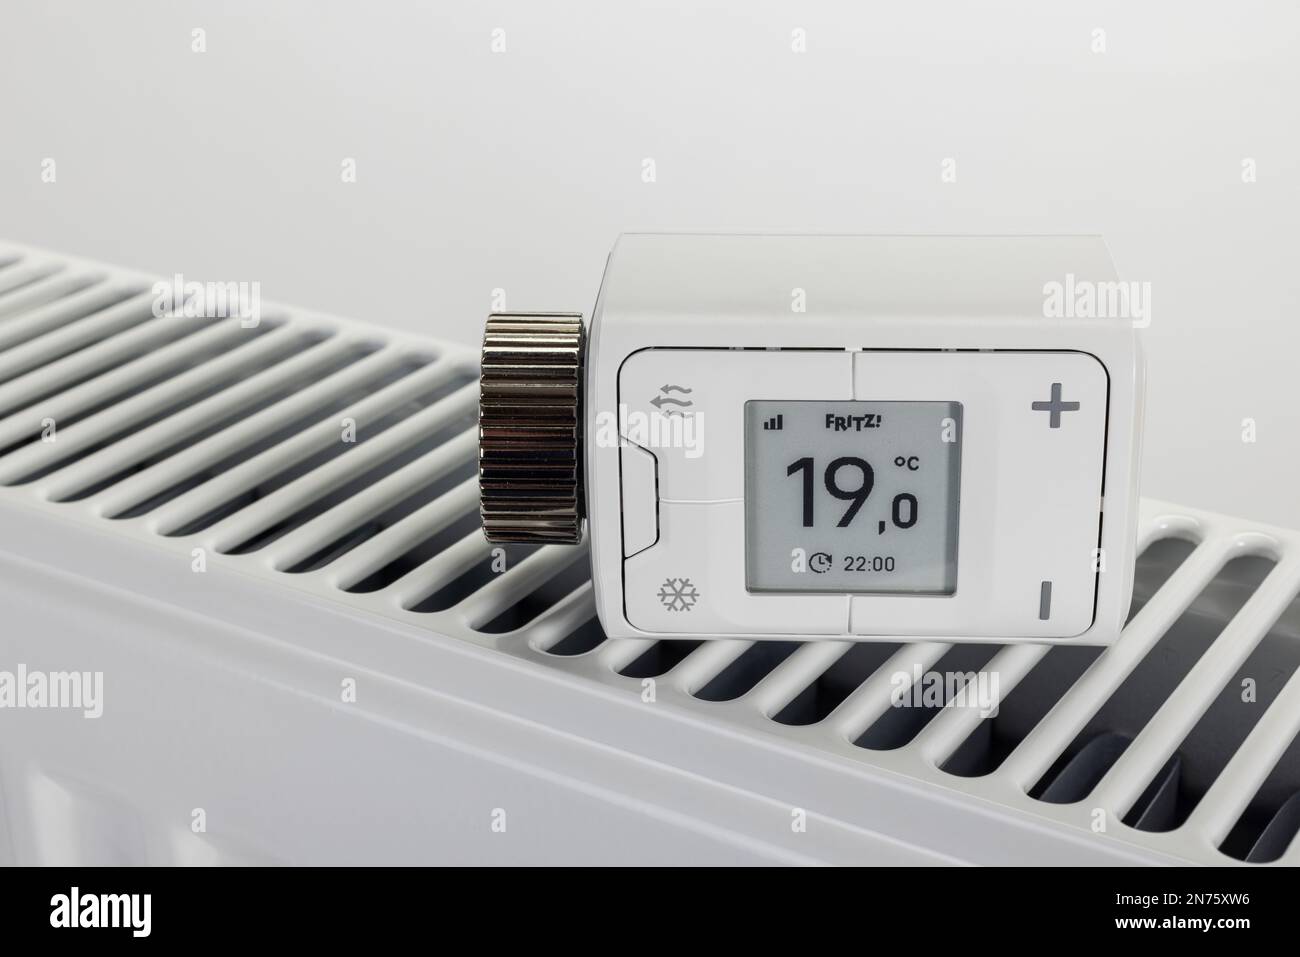 https://c8.alamy.com/comp/2N75XW6/wlan-radiator-thermostat-fritz!-dect-302-display-shows-1c-on-radiator-symbol-image-change-thermostat-smart-home-technology-networking-digital-energy-costs-rising-heating-costs-white-background-2N75XW6.jpg